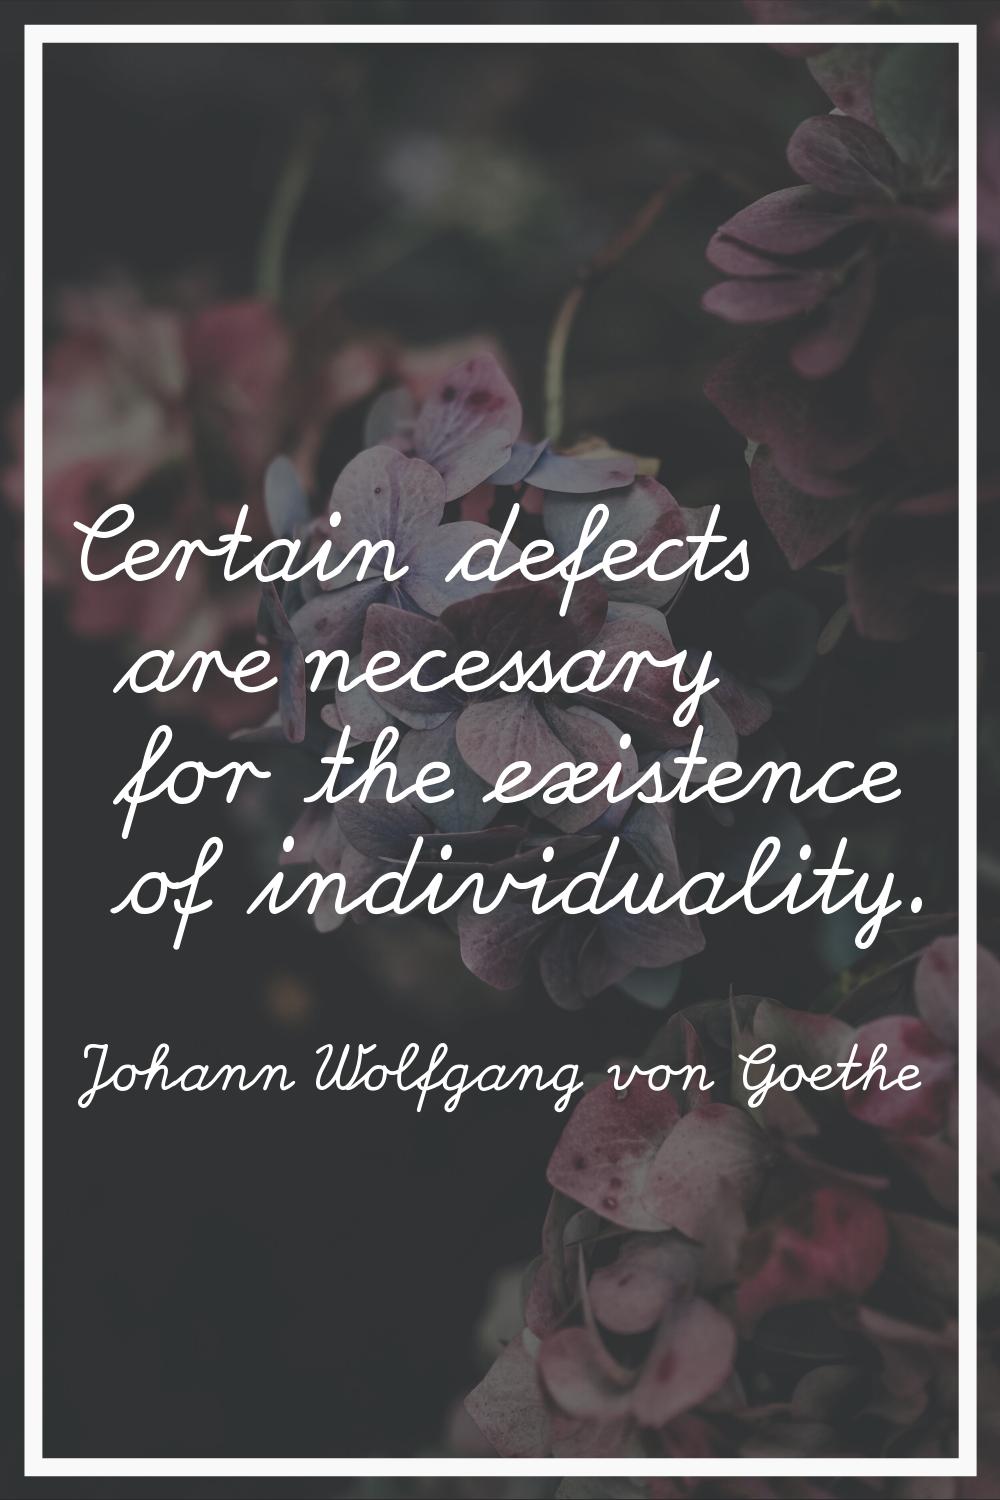 Certain defects are necessary for the existence of individuality.